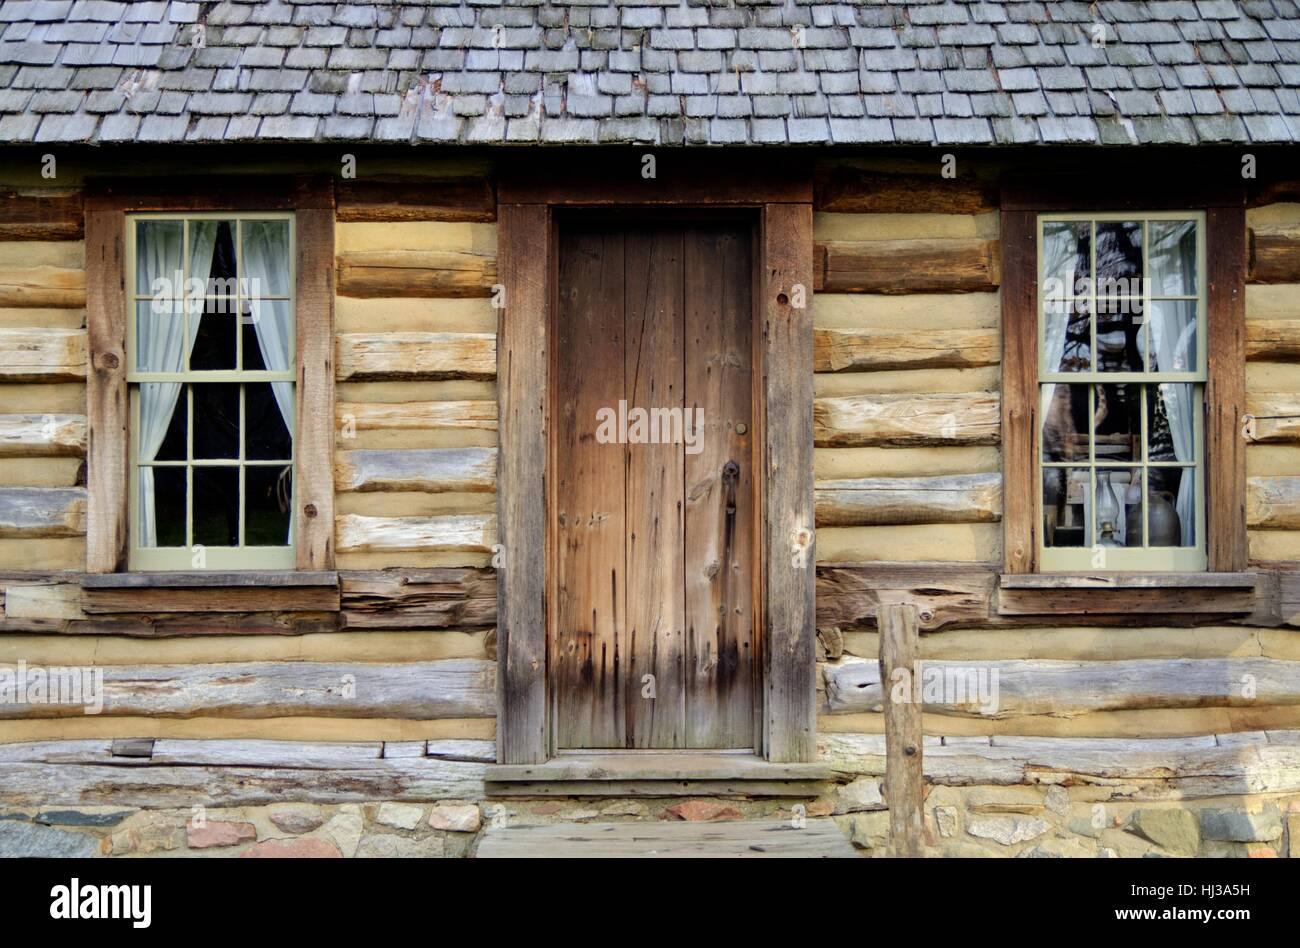 Traditional Pioneer Log Cabin. Exterior front door and wall of historical 1800s style pioneer home. Stock Photo